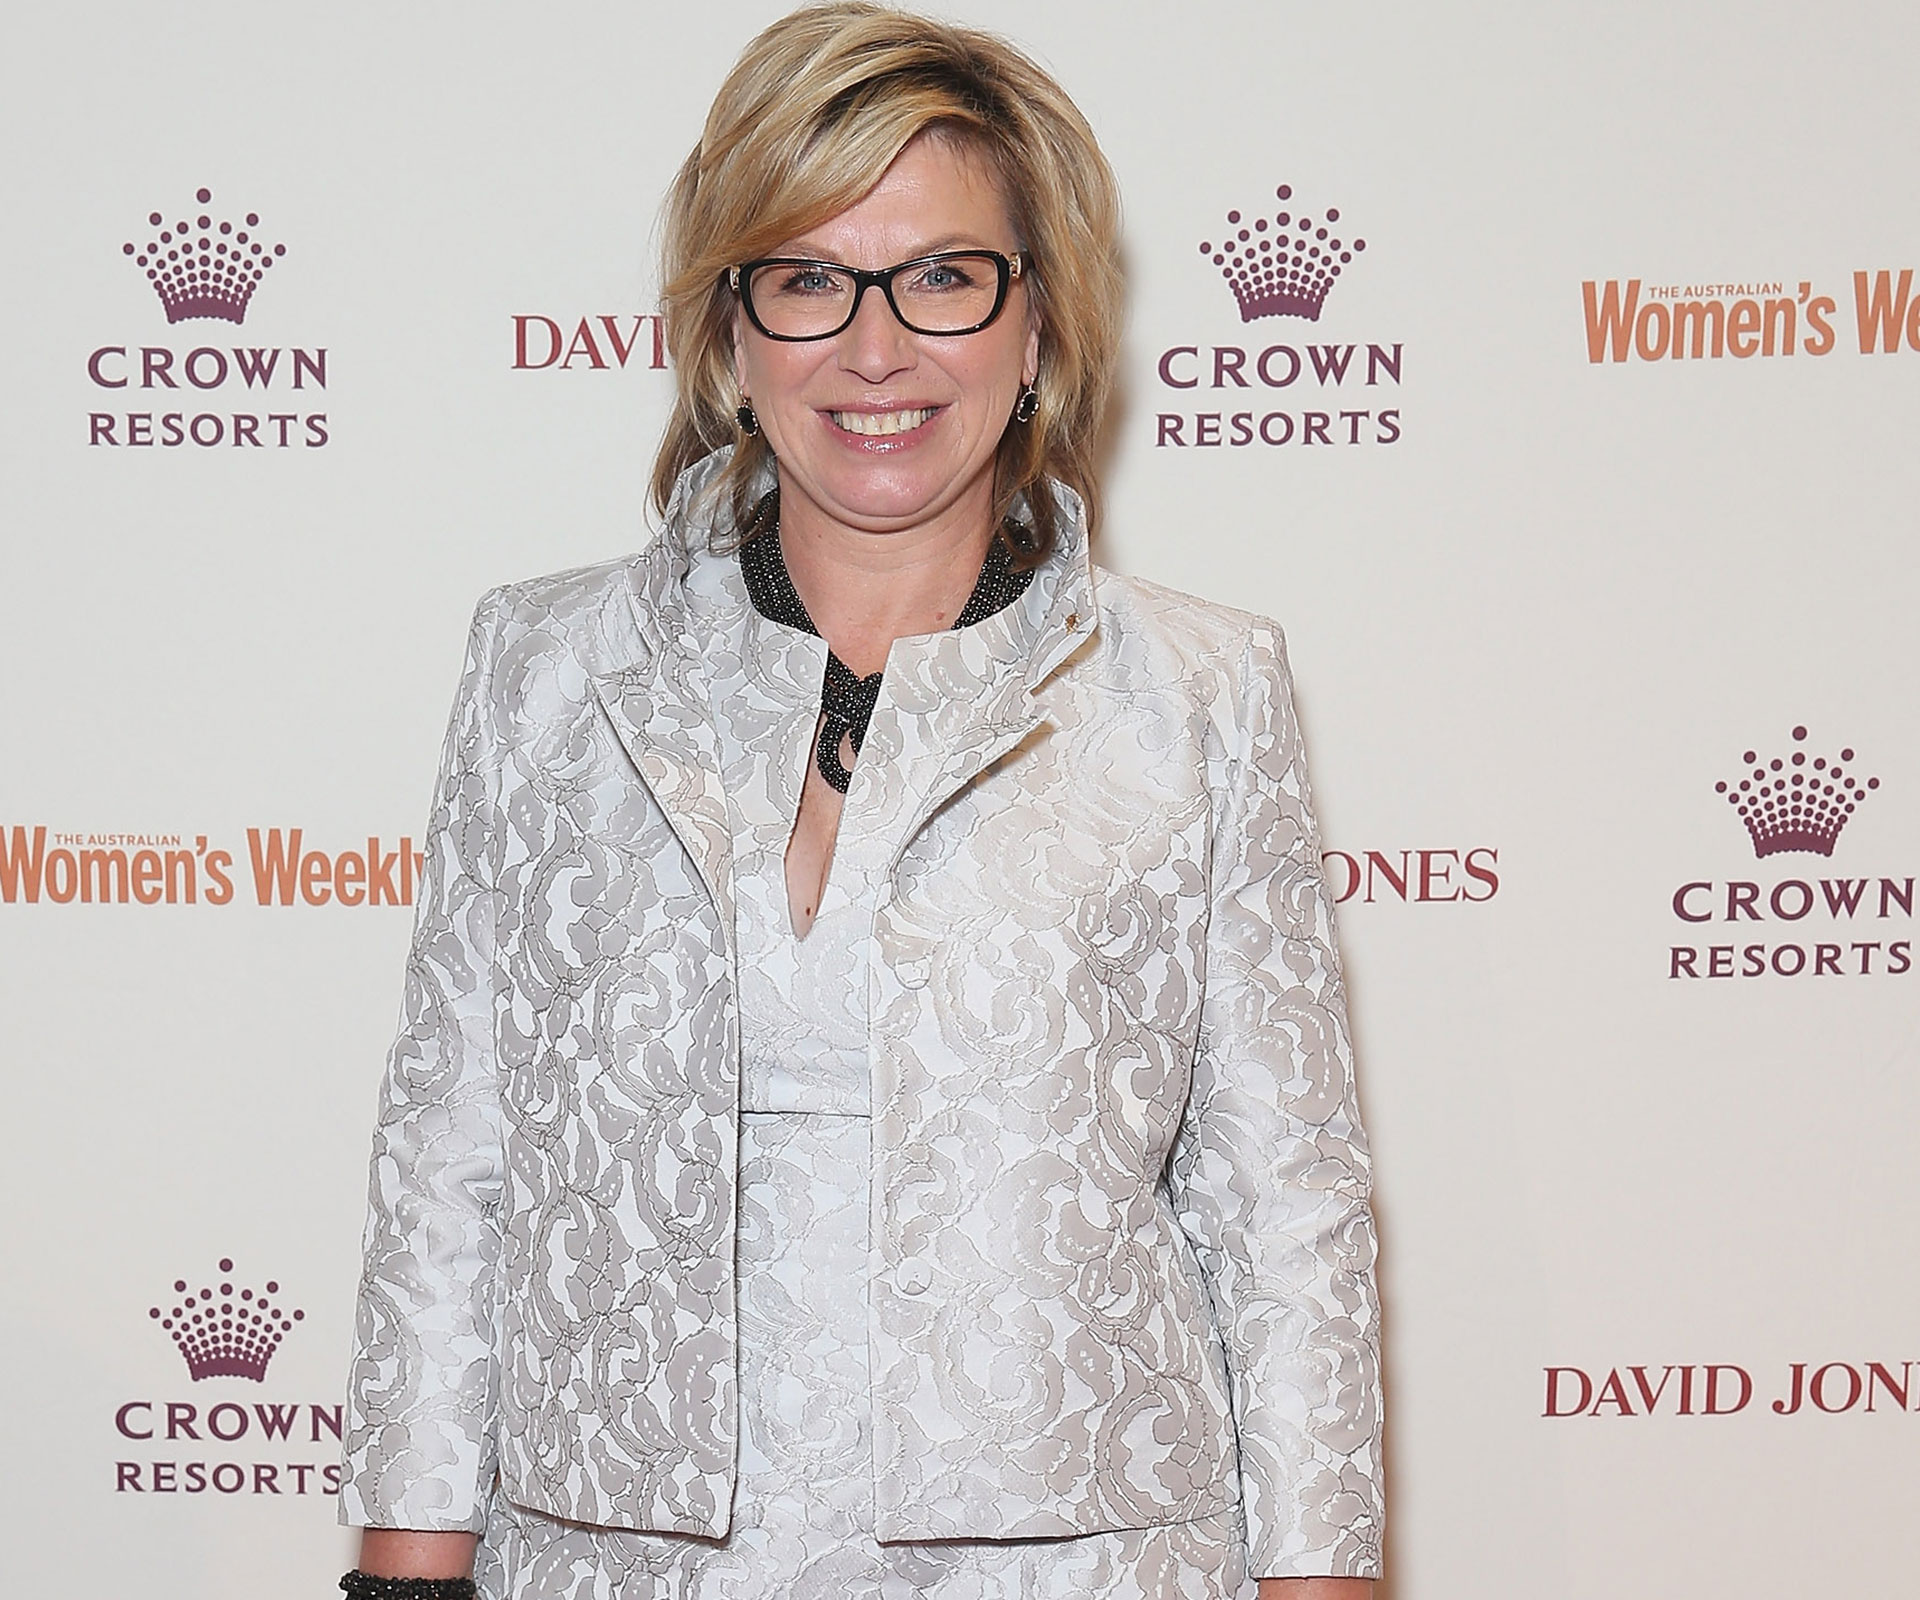 Rosie Batty: How can Government fund plebiscite and not domestic violence reform?